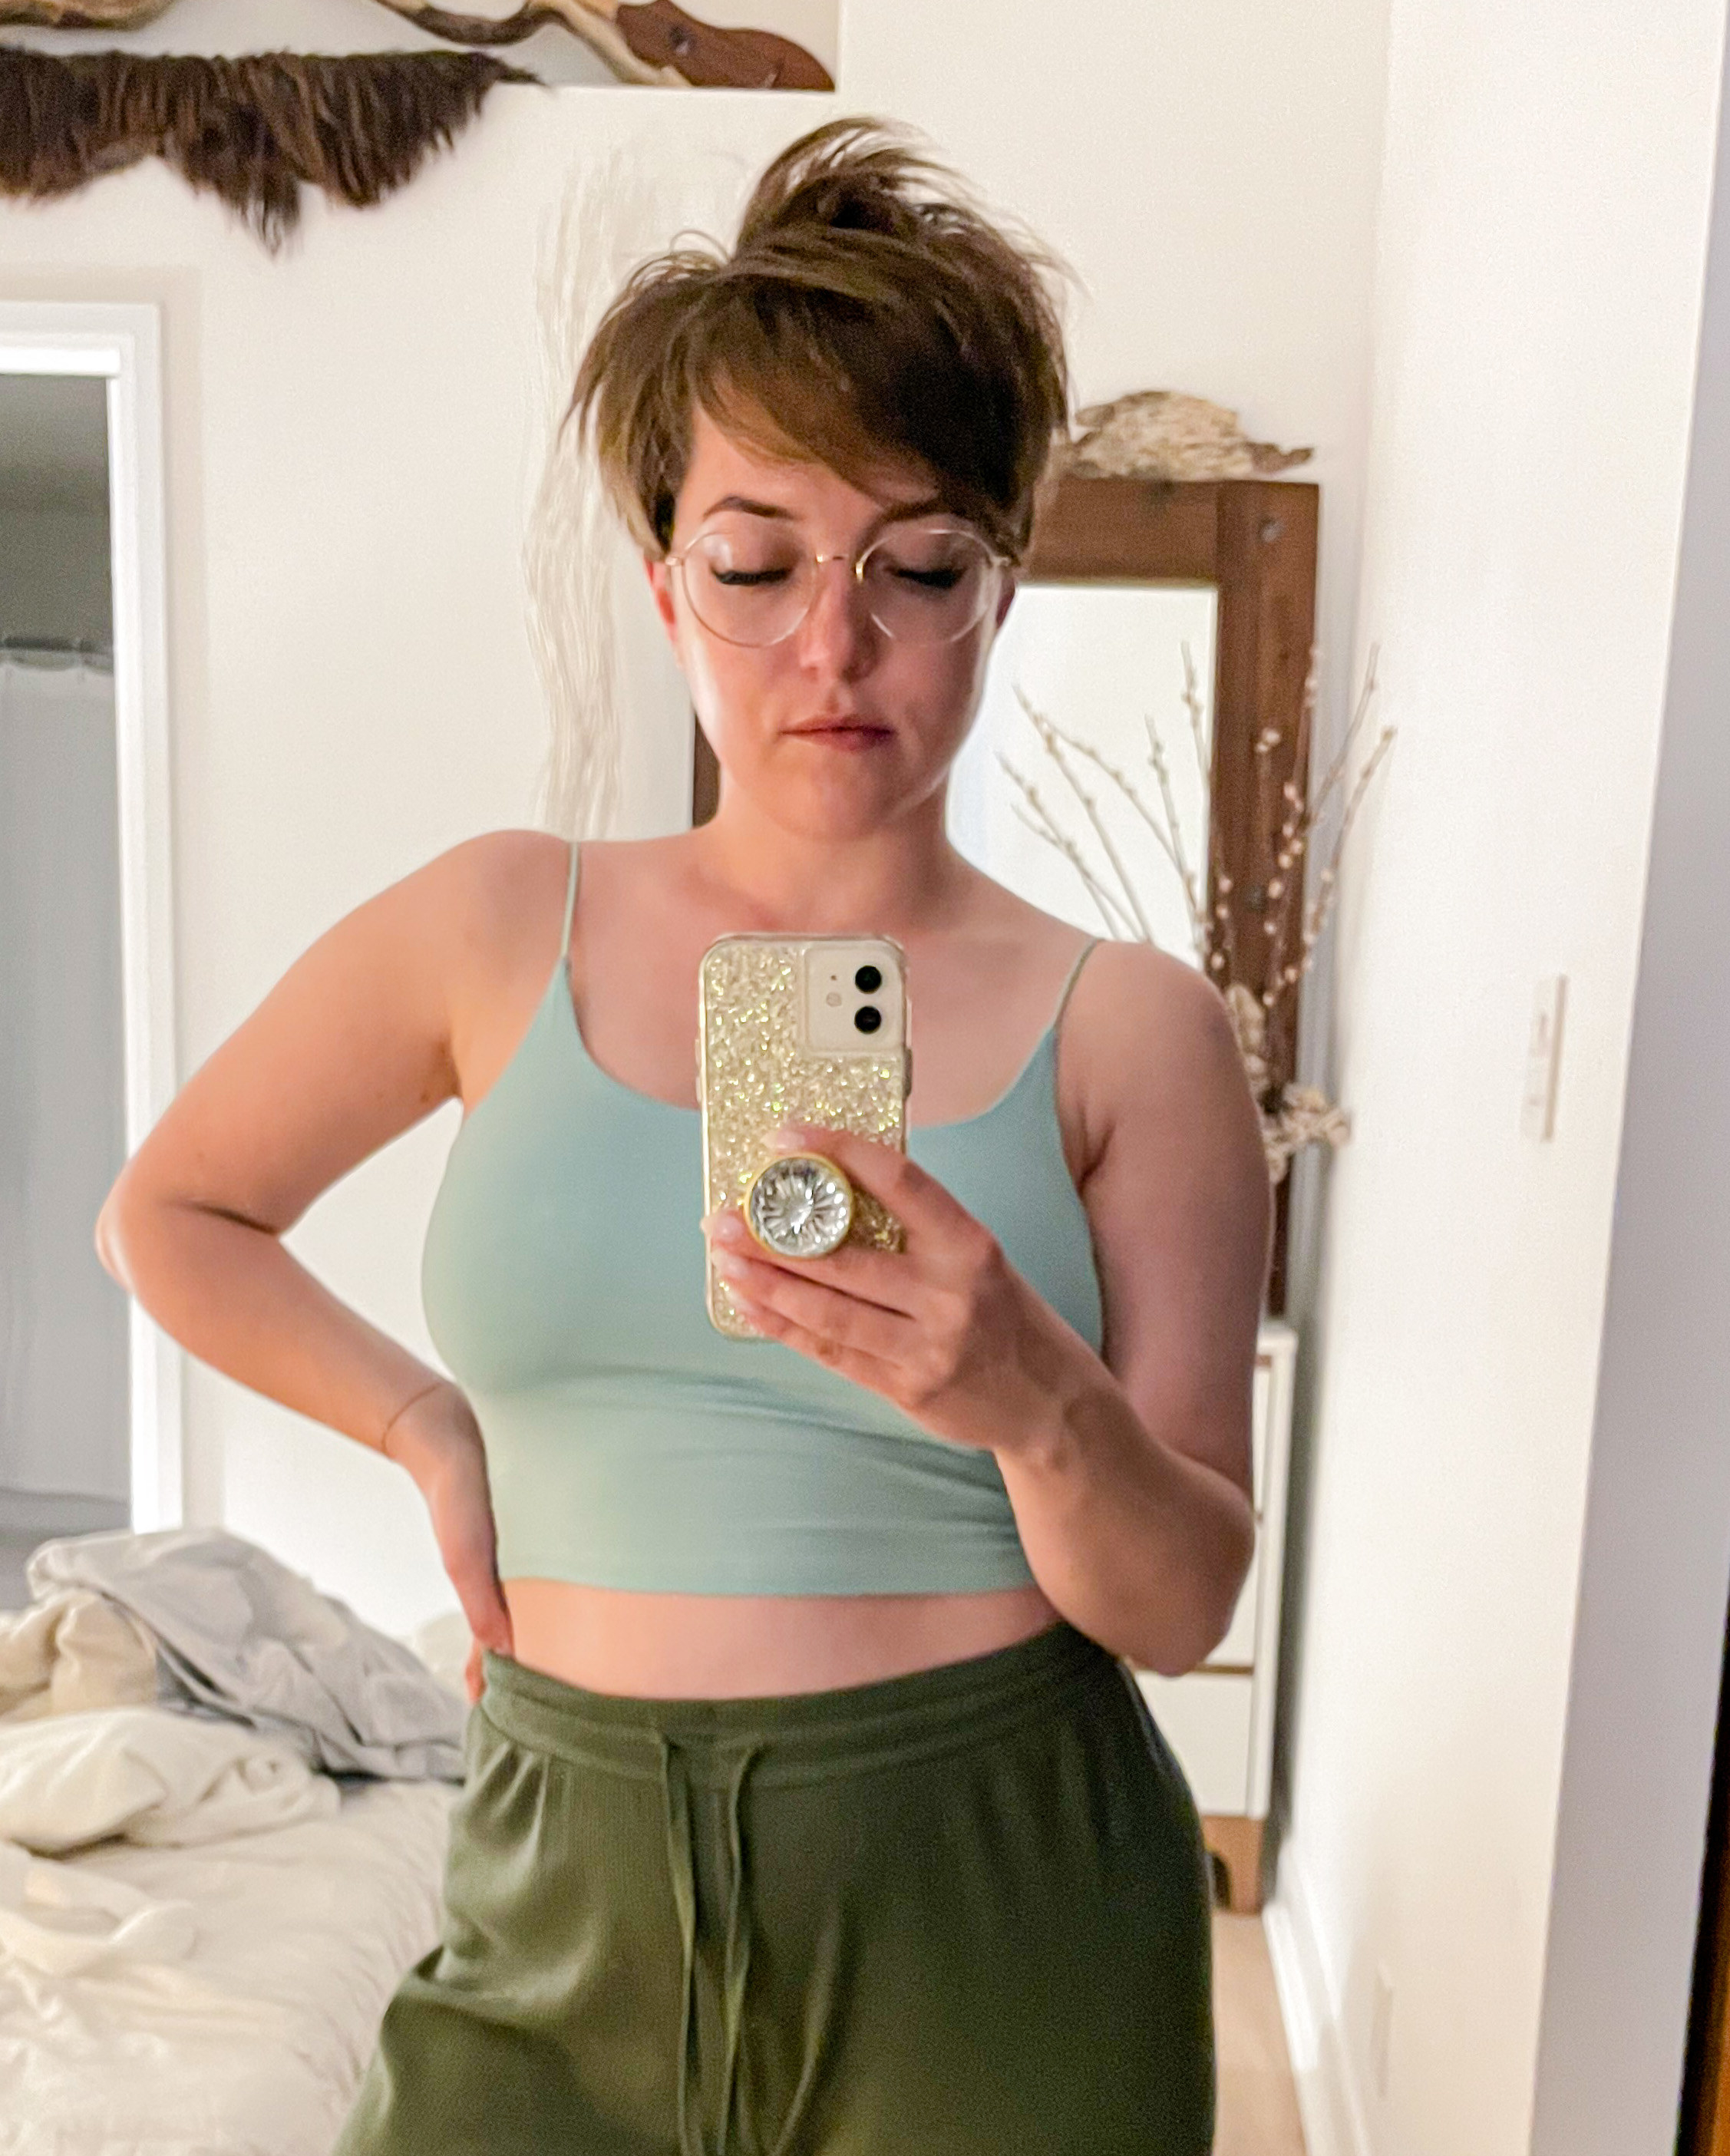 Victoria taking a mirror selfie while wearing one of the cropped tank tops